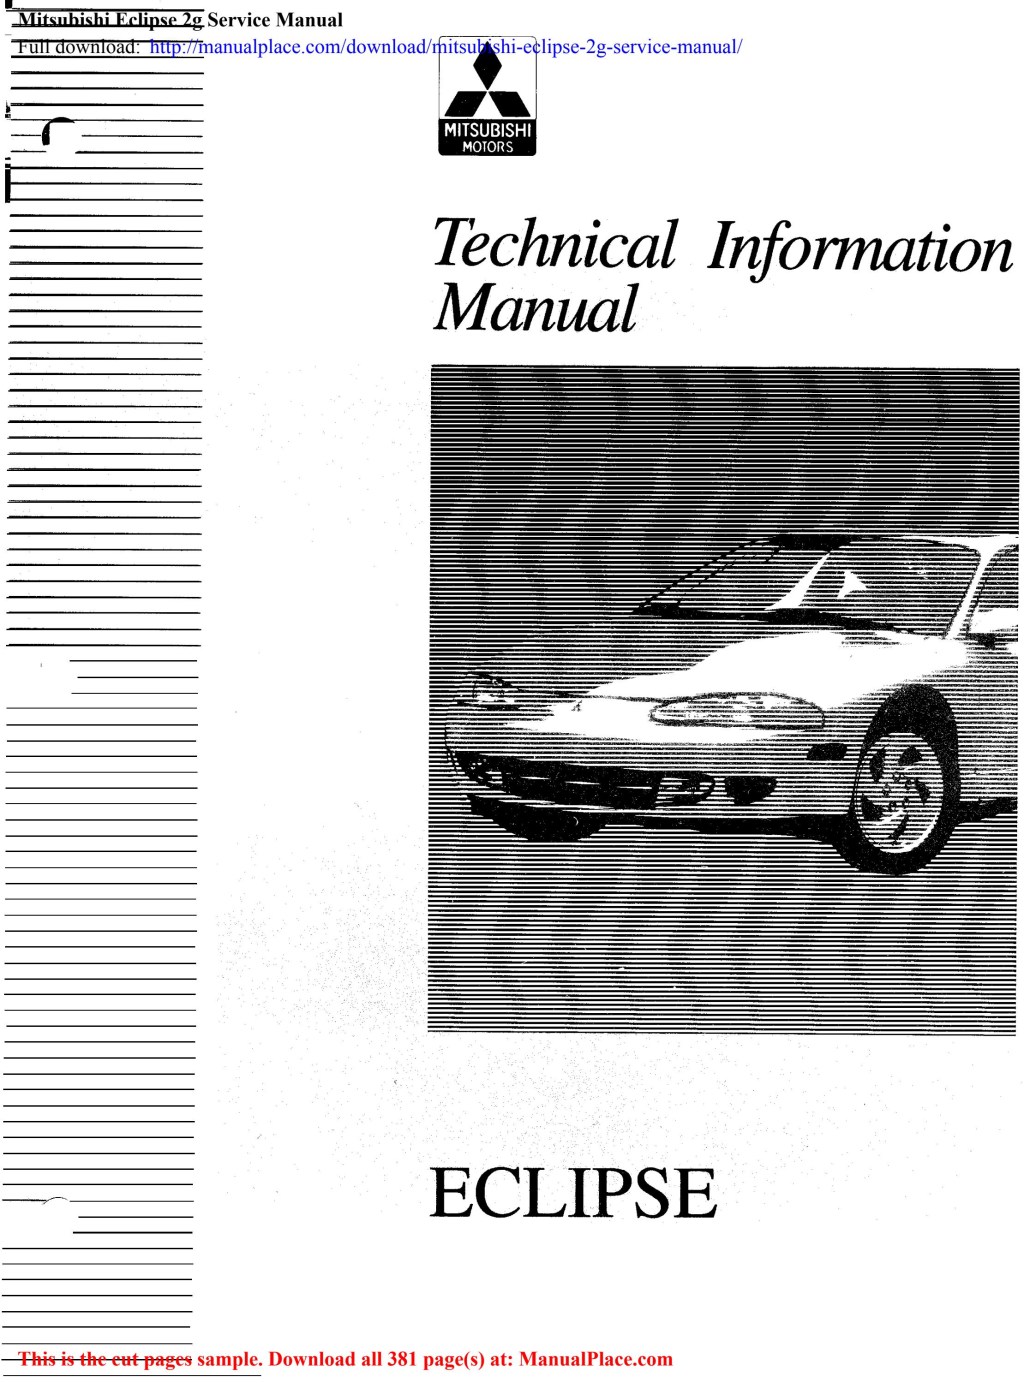 Picture of: Mitsubishi Eclipse g Service Manual by MarciaWarnacky – Issuu